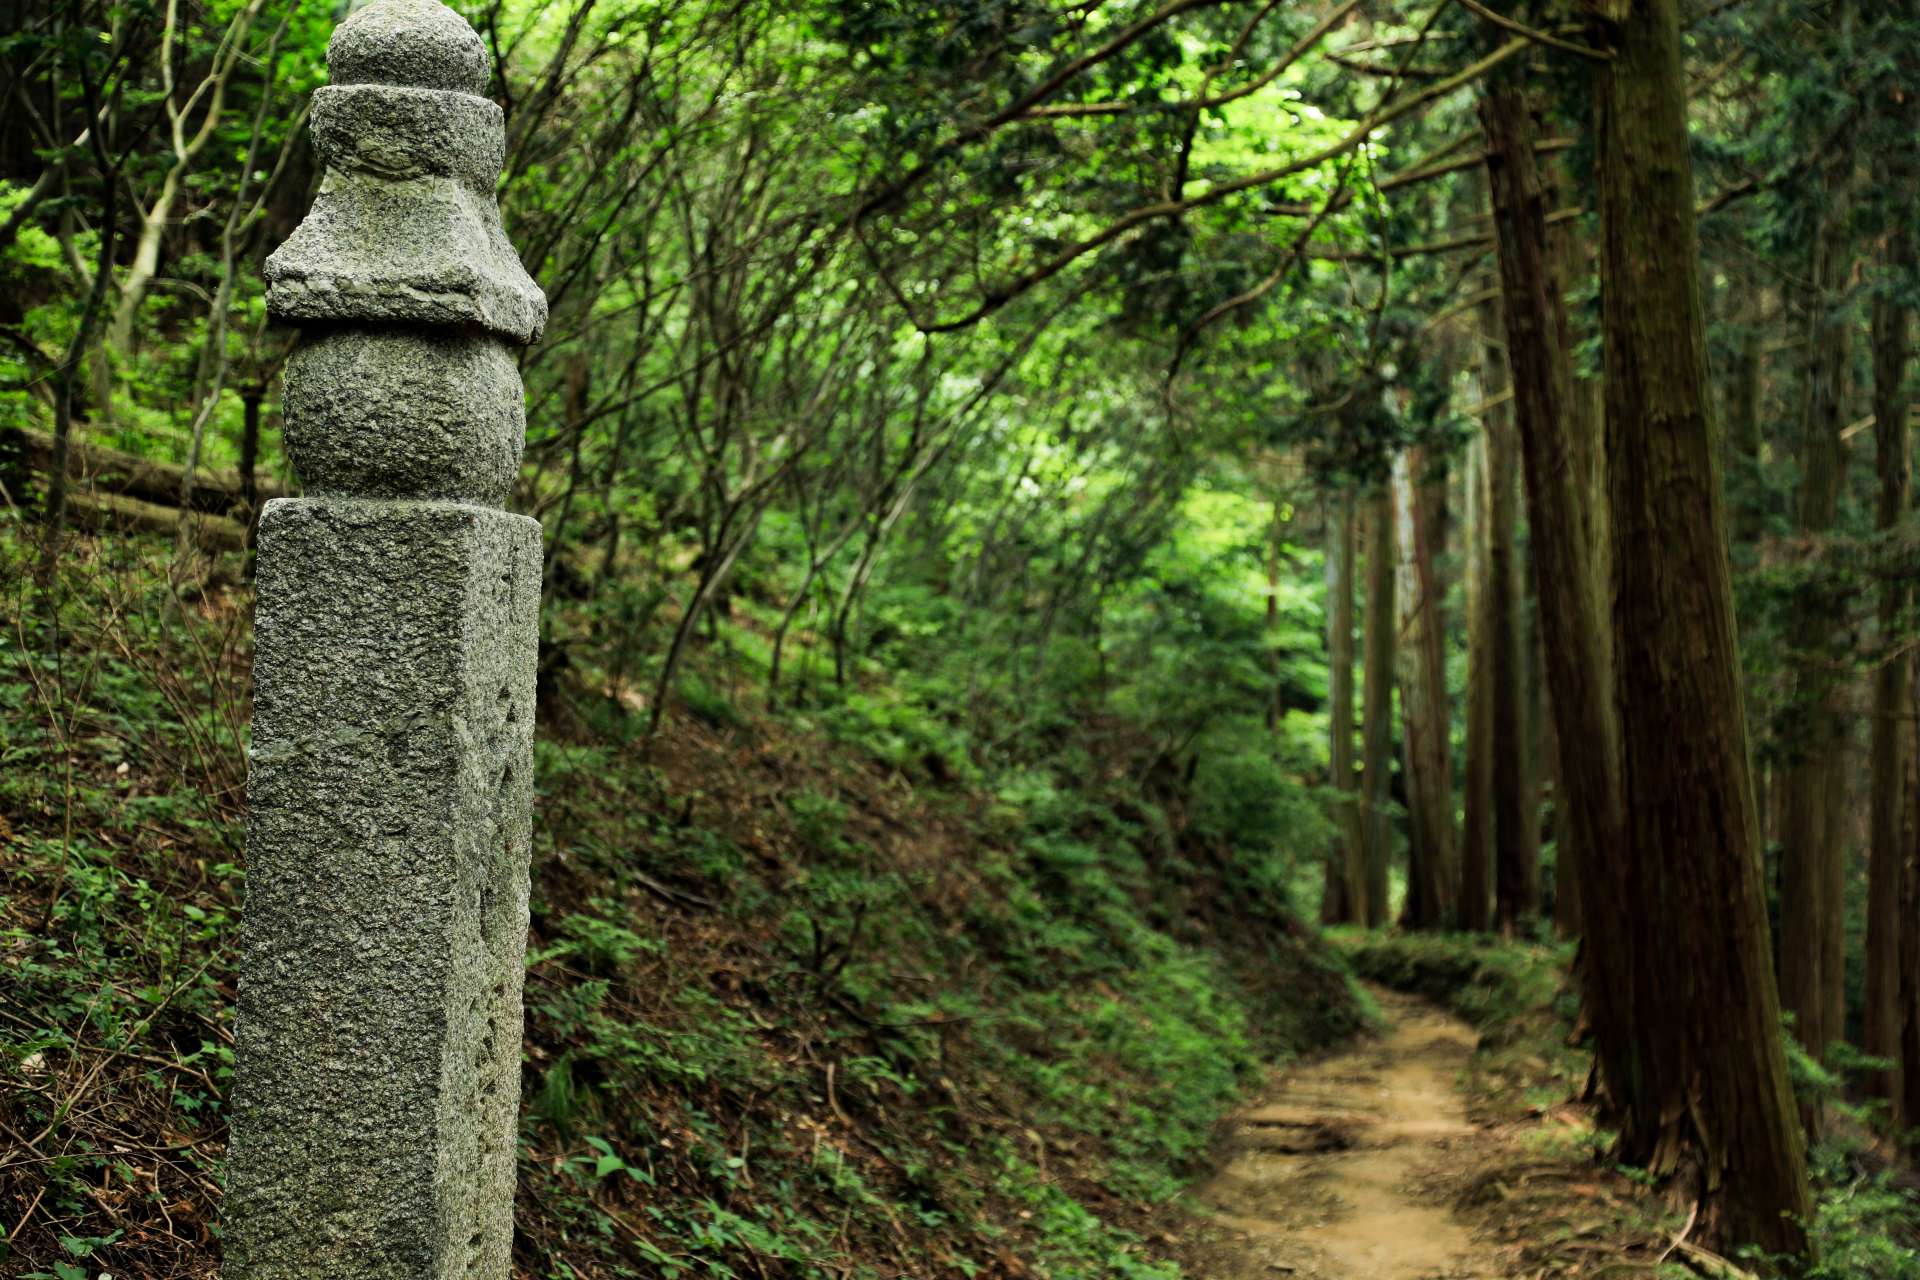 Choishi are stone pillars that mimic the shape of a gorinto, or five-tiered pagoda. They were originally made of wood but can now be seen in this stone construction popularized during the Kamakura period (1185-1333). 